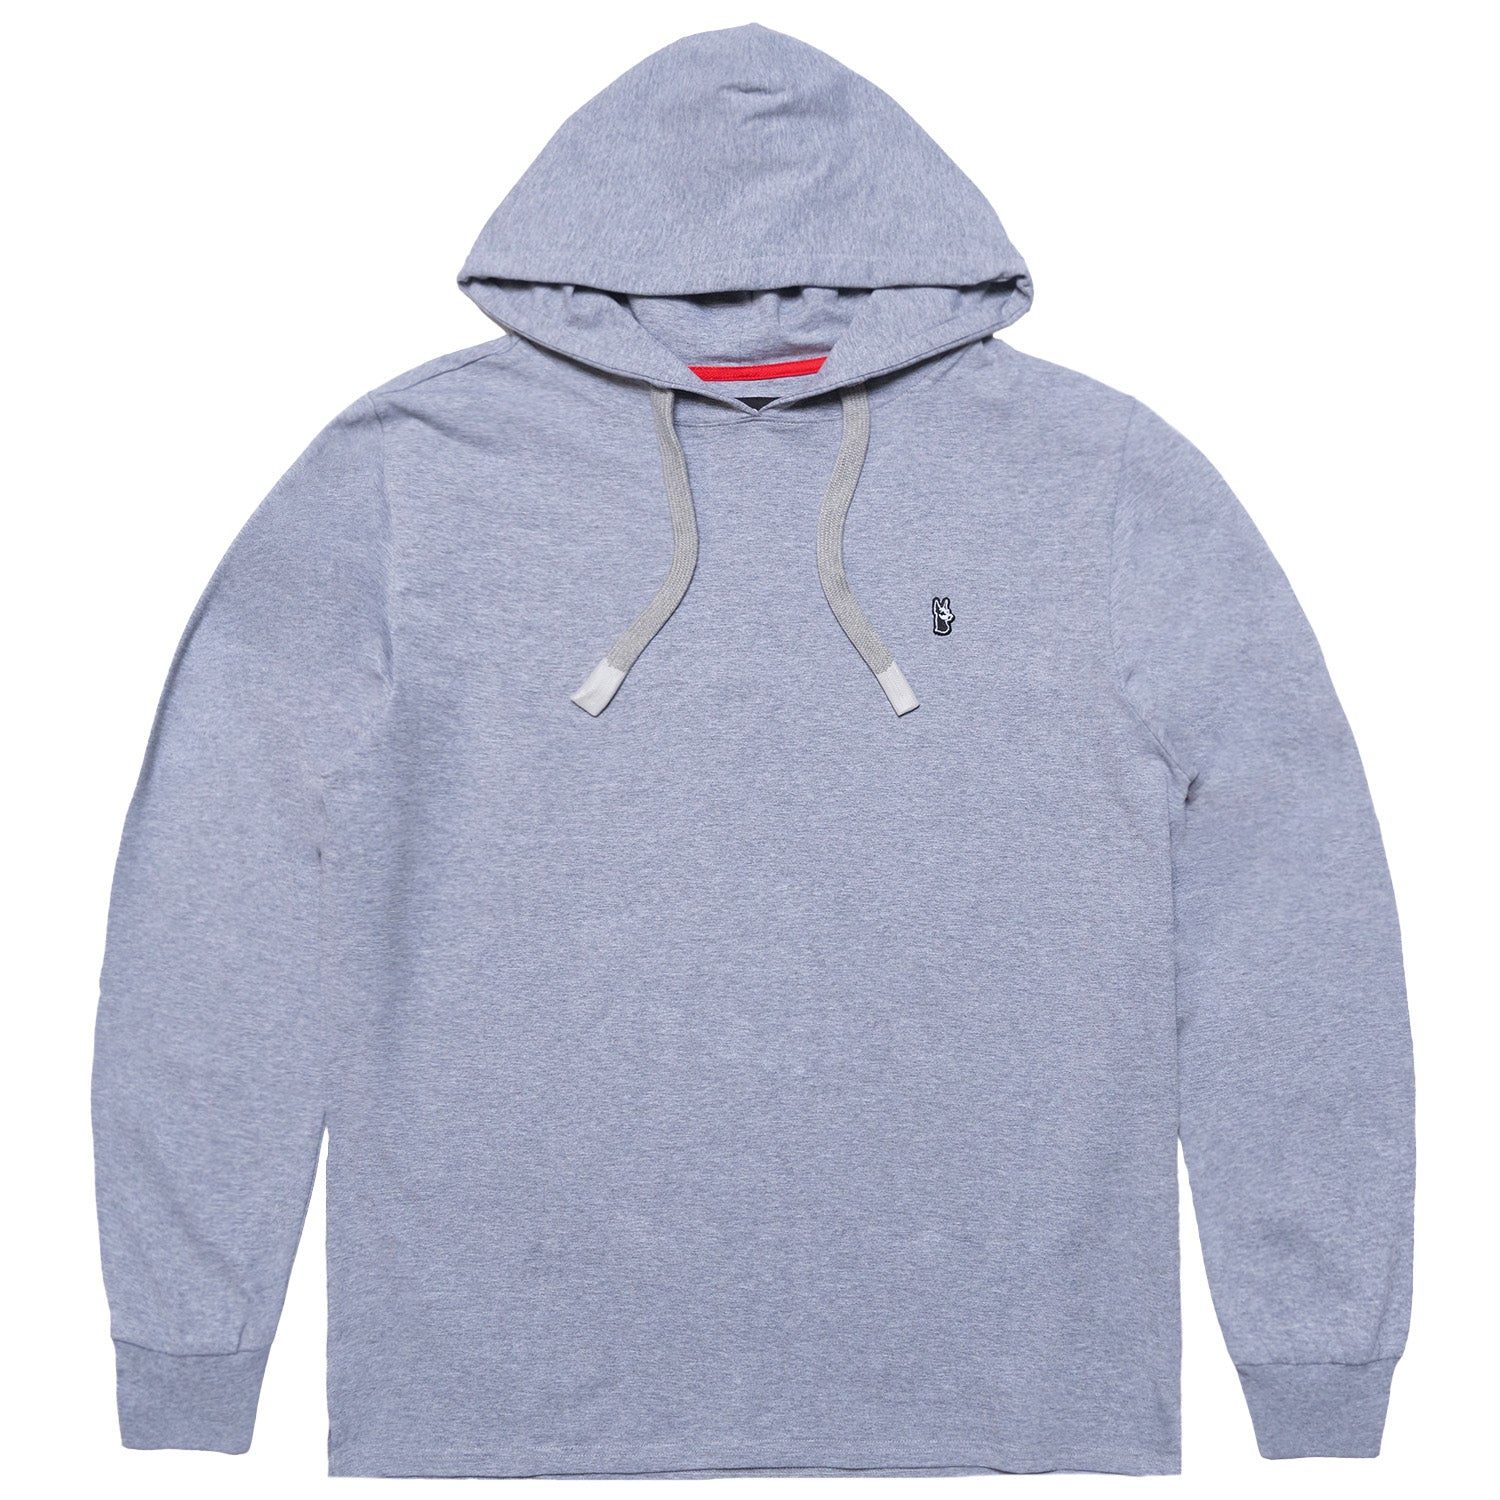 M4500 Luciano Jersey Hoodie - Gray